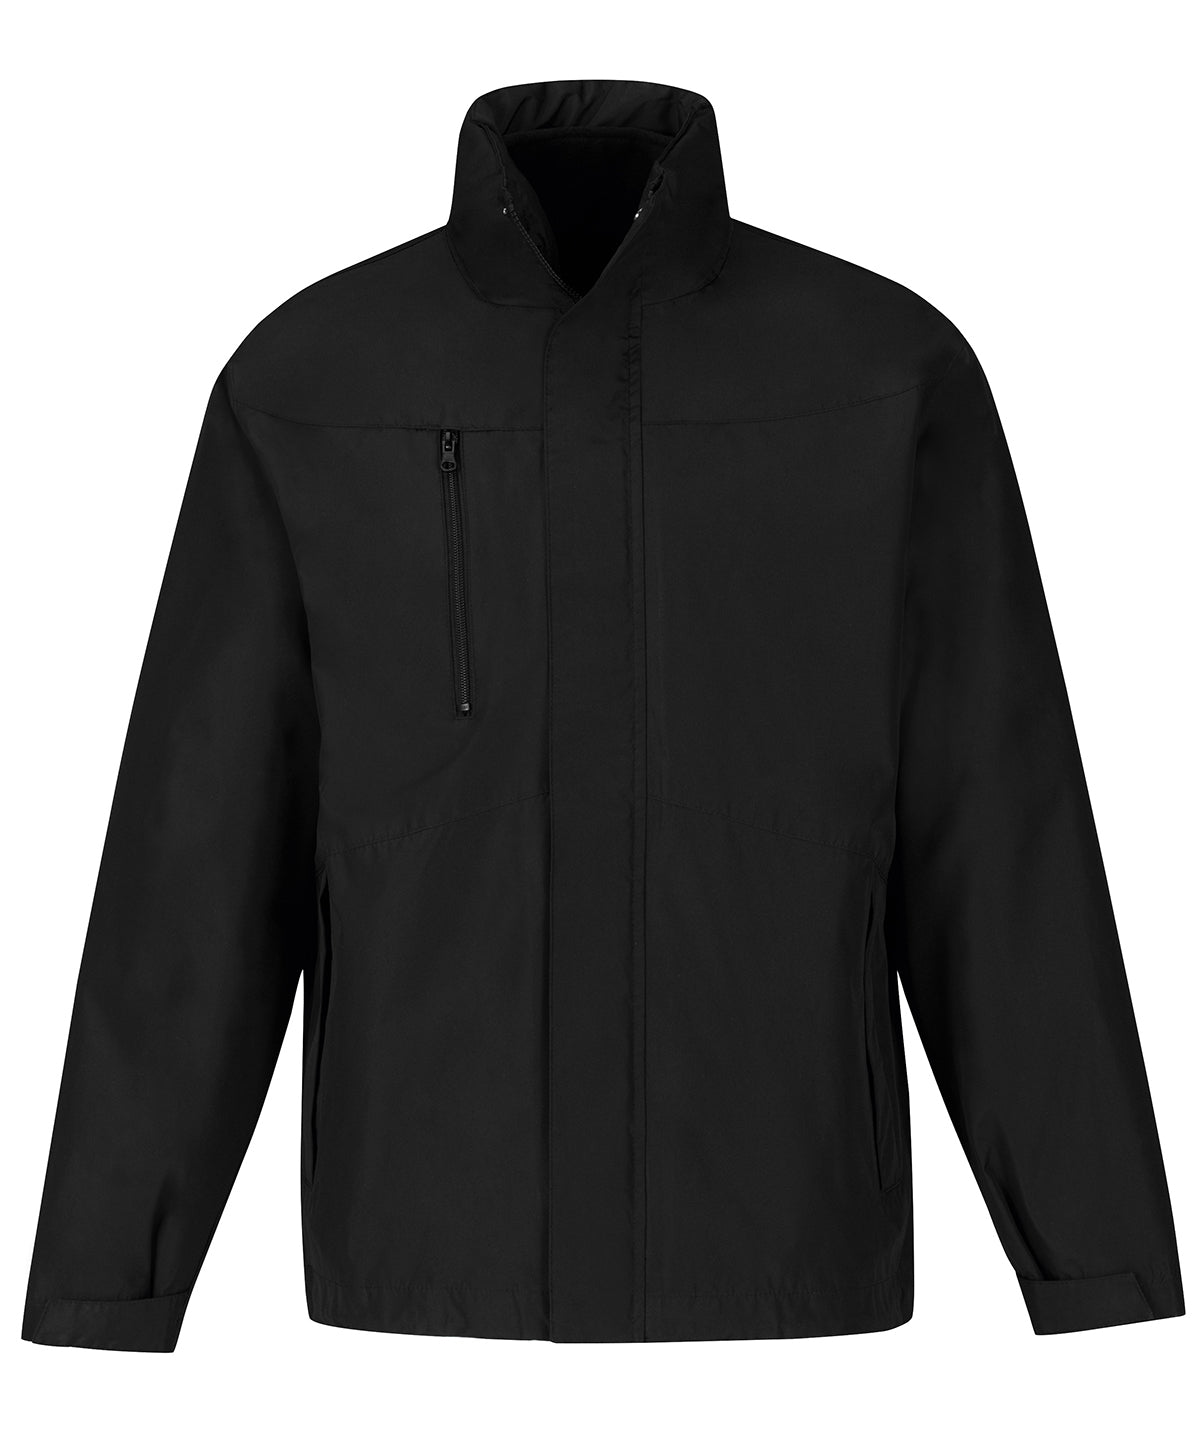 BC Corporate 3-in-1 jacket | Black